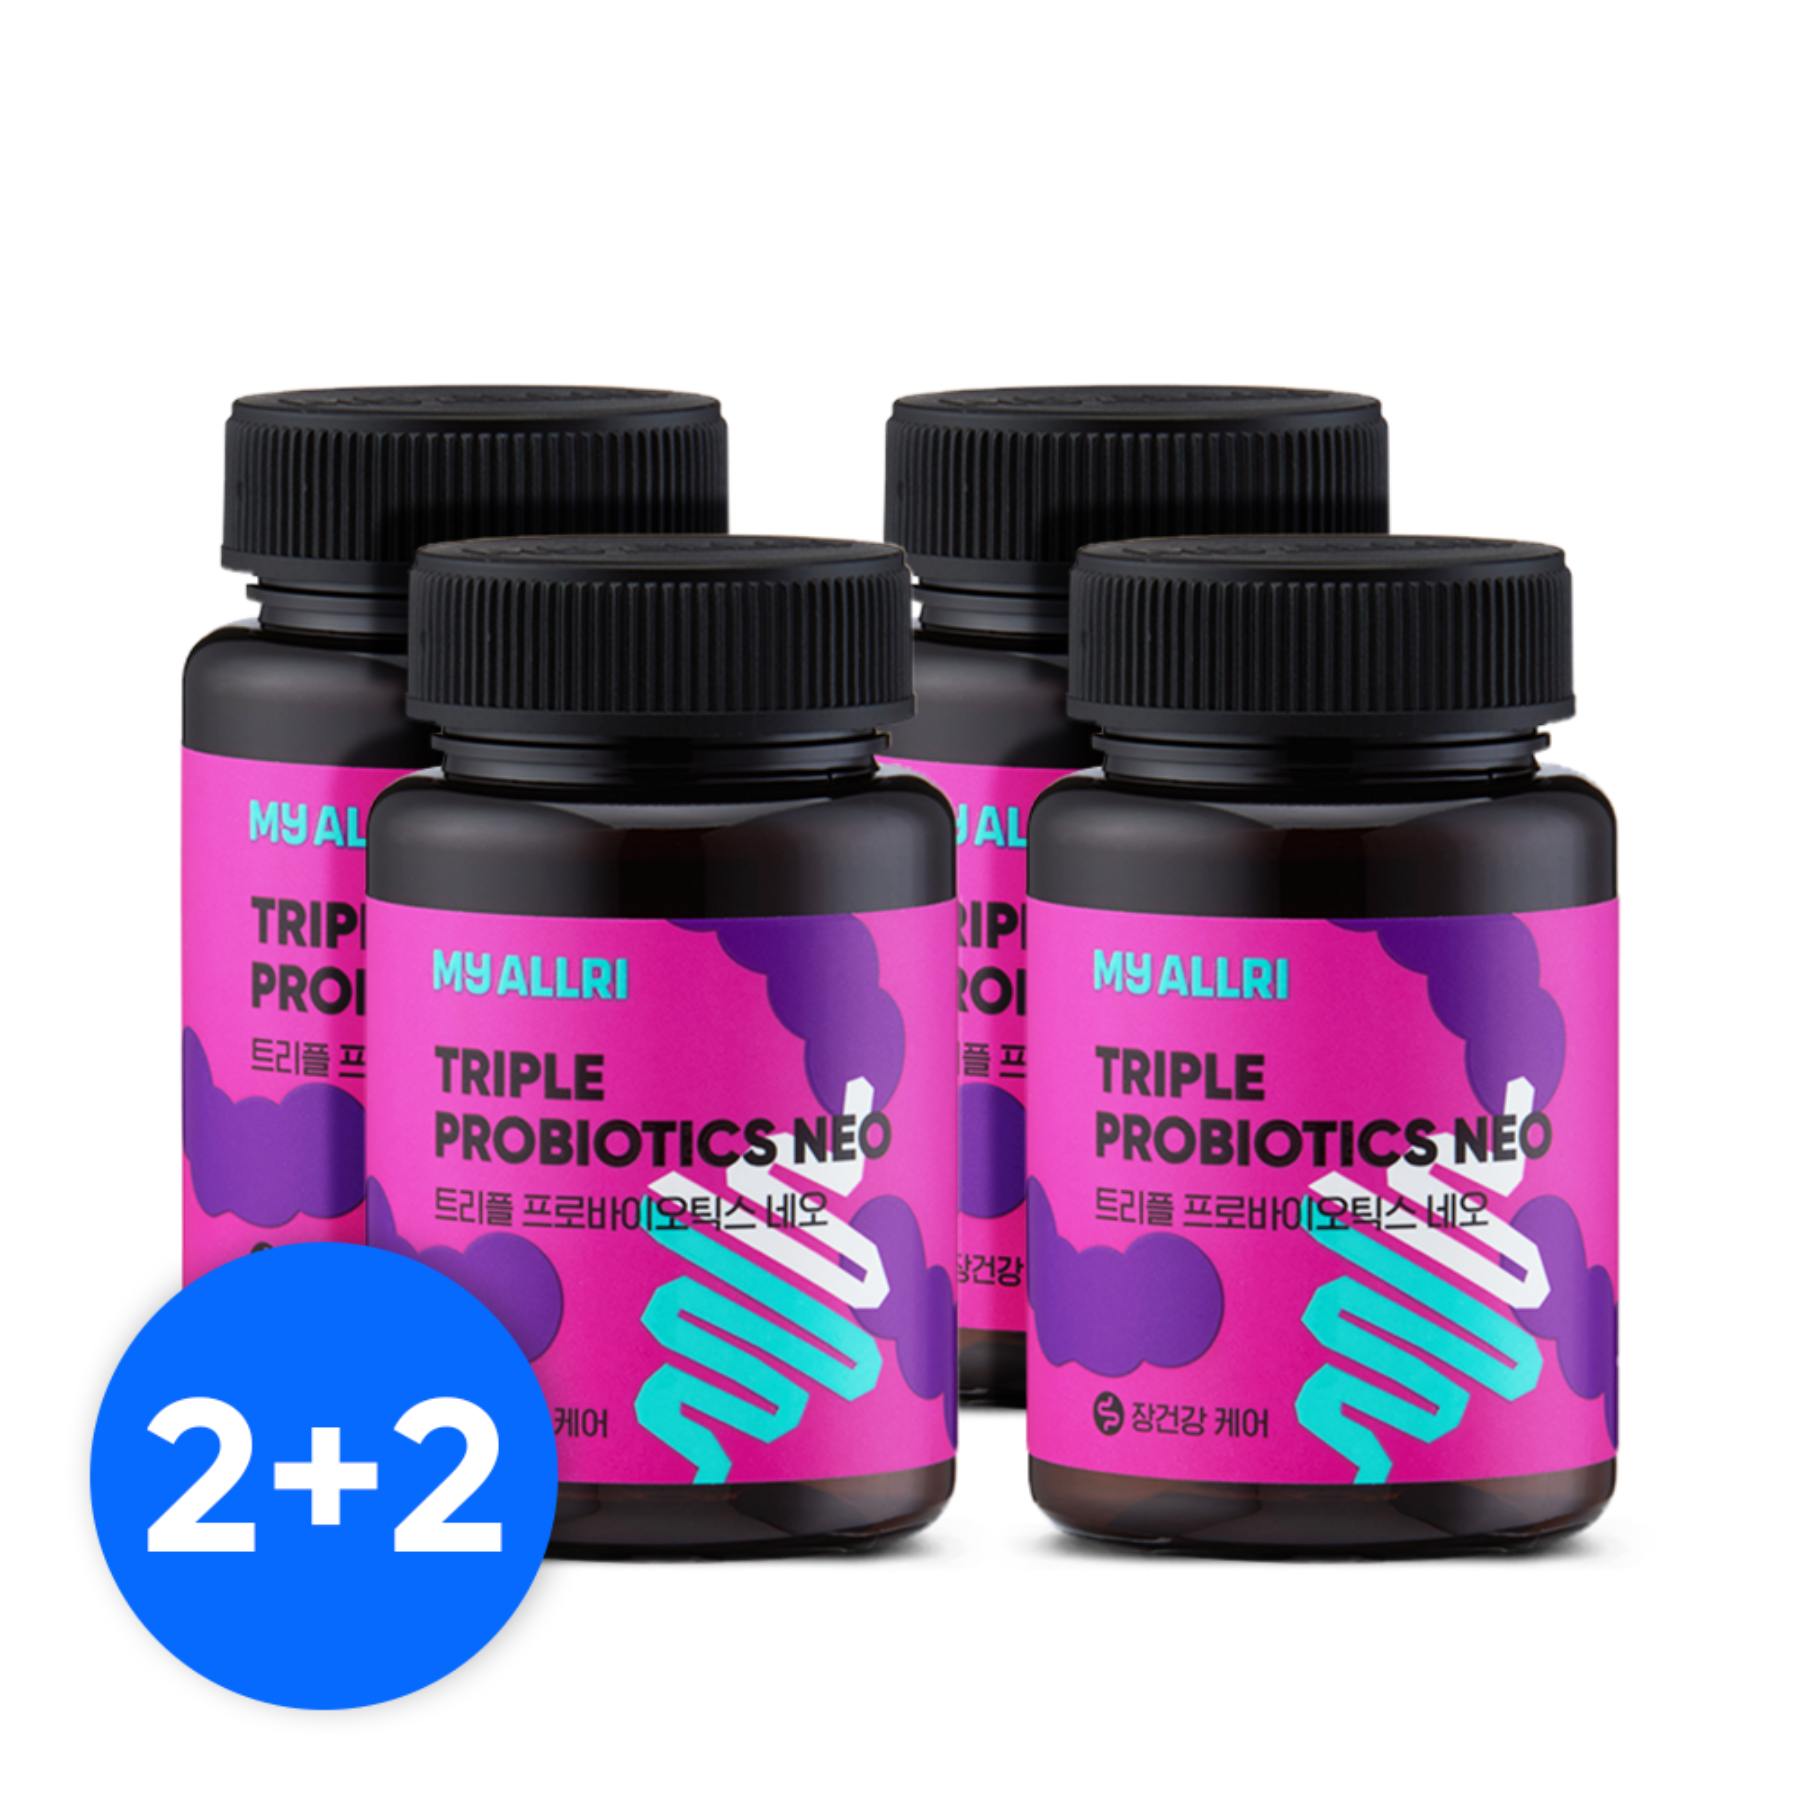 [2+2] Triple Probiotics Neo 1ea for 2 months (total 8 months&#039; supply)